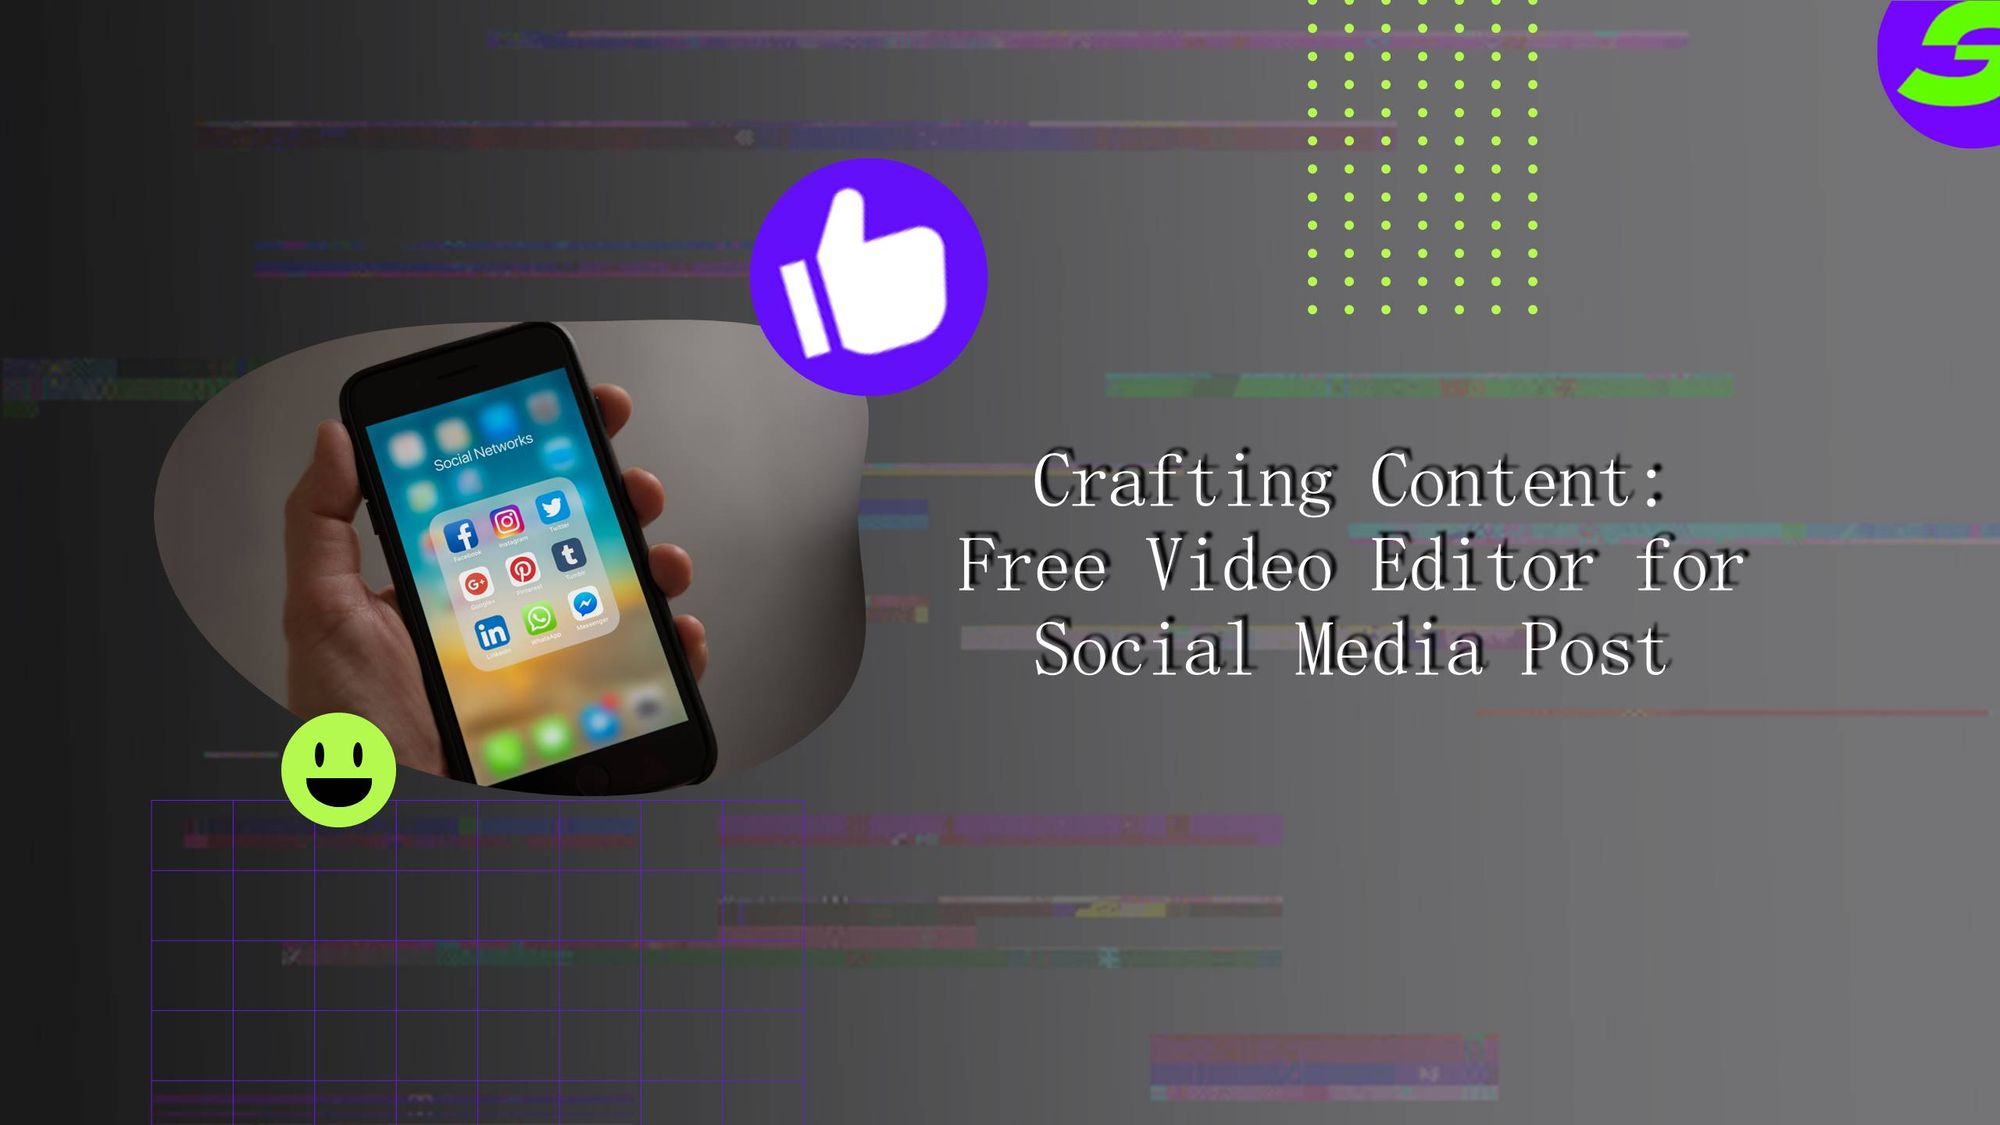 Create Content using Free Video Editor for Social Media Post